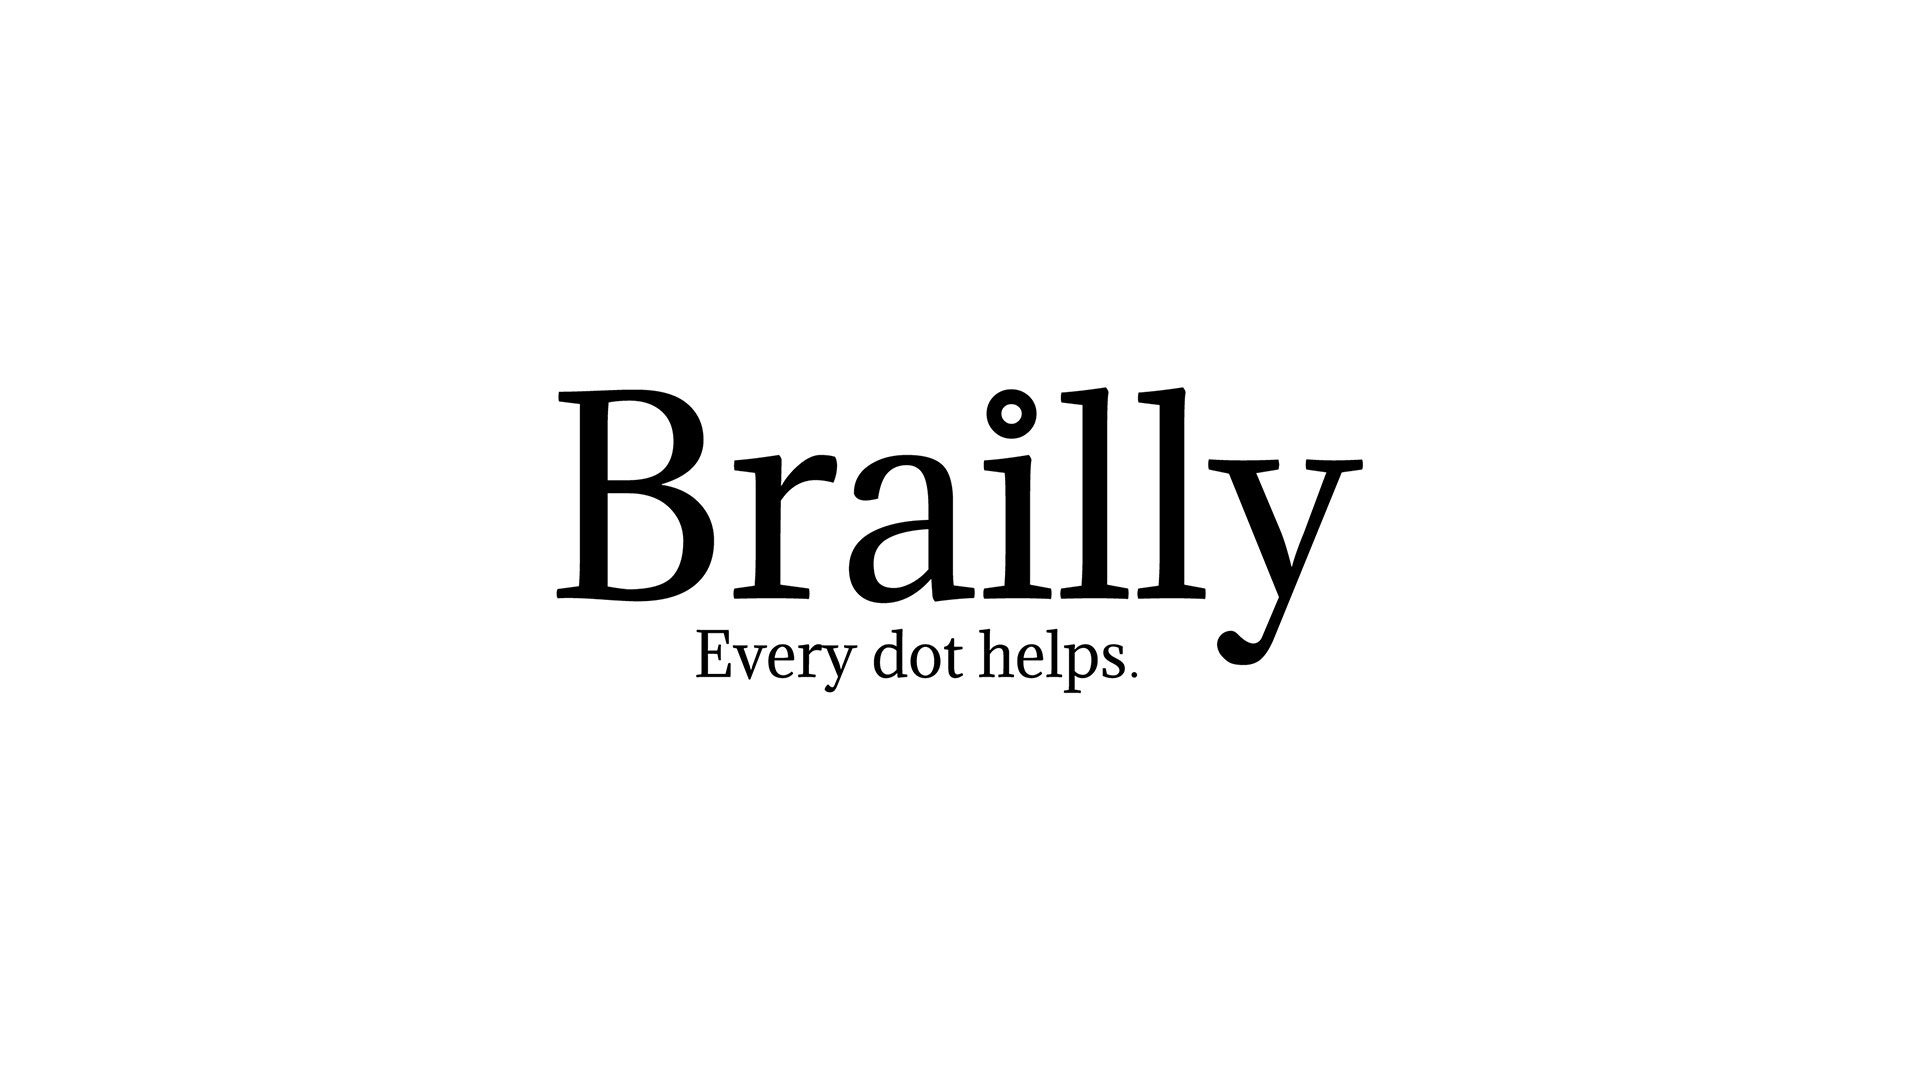 Brailly logo and tagline, Every dot helps; black type over white background